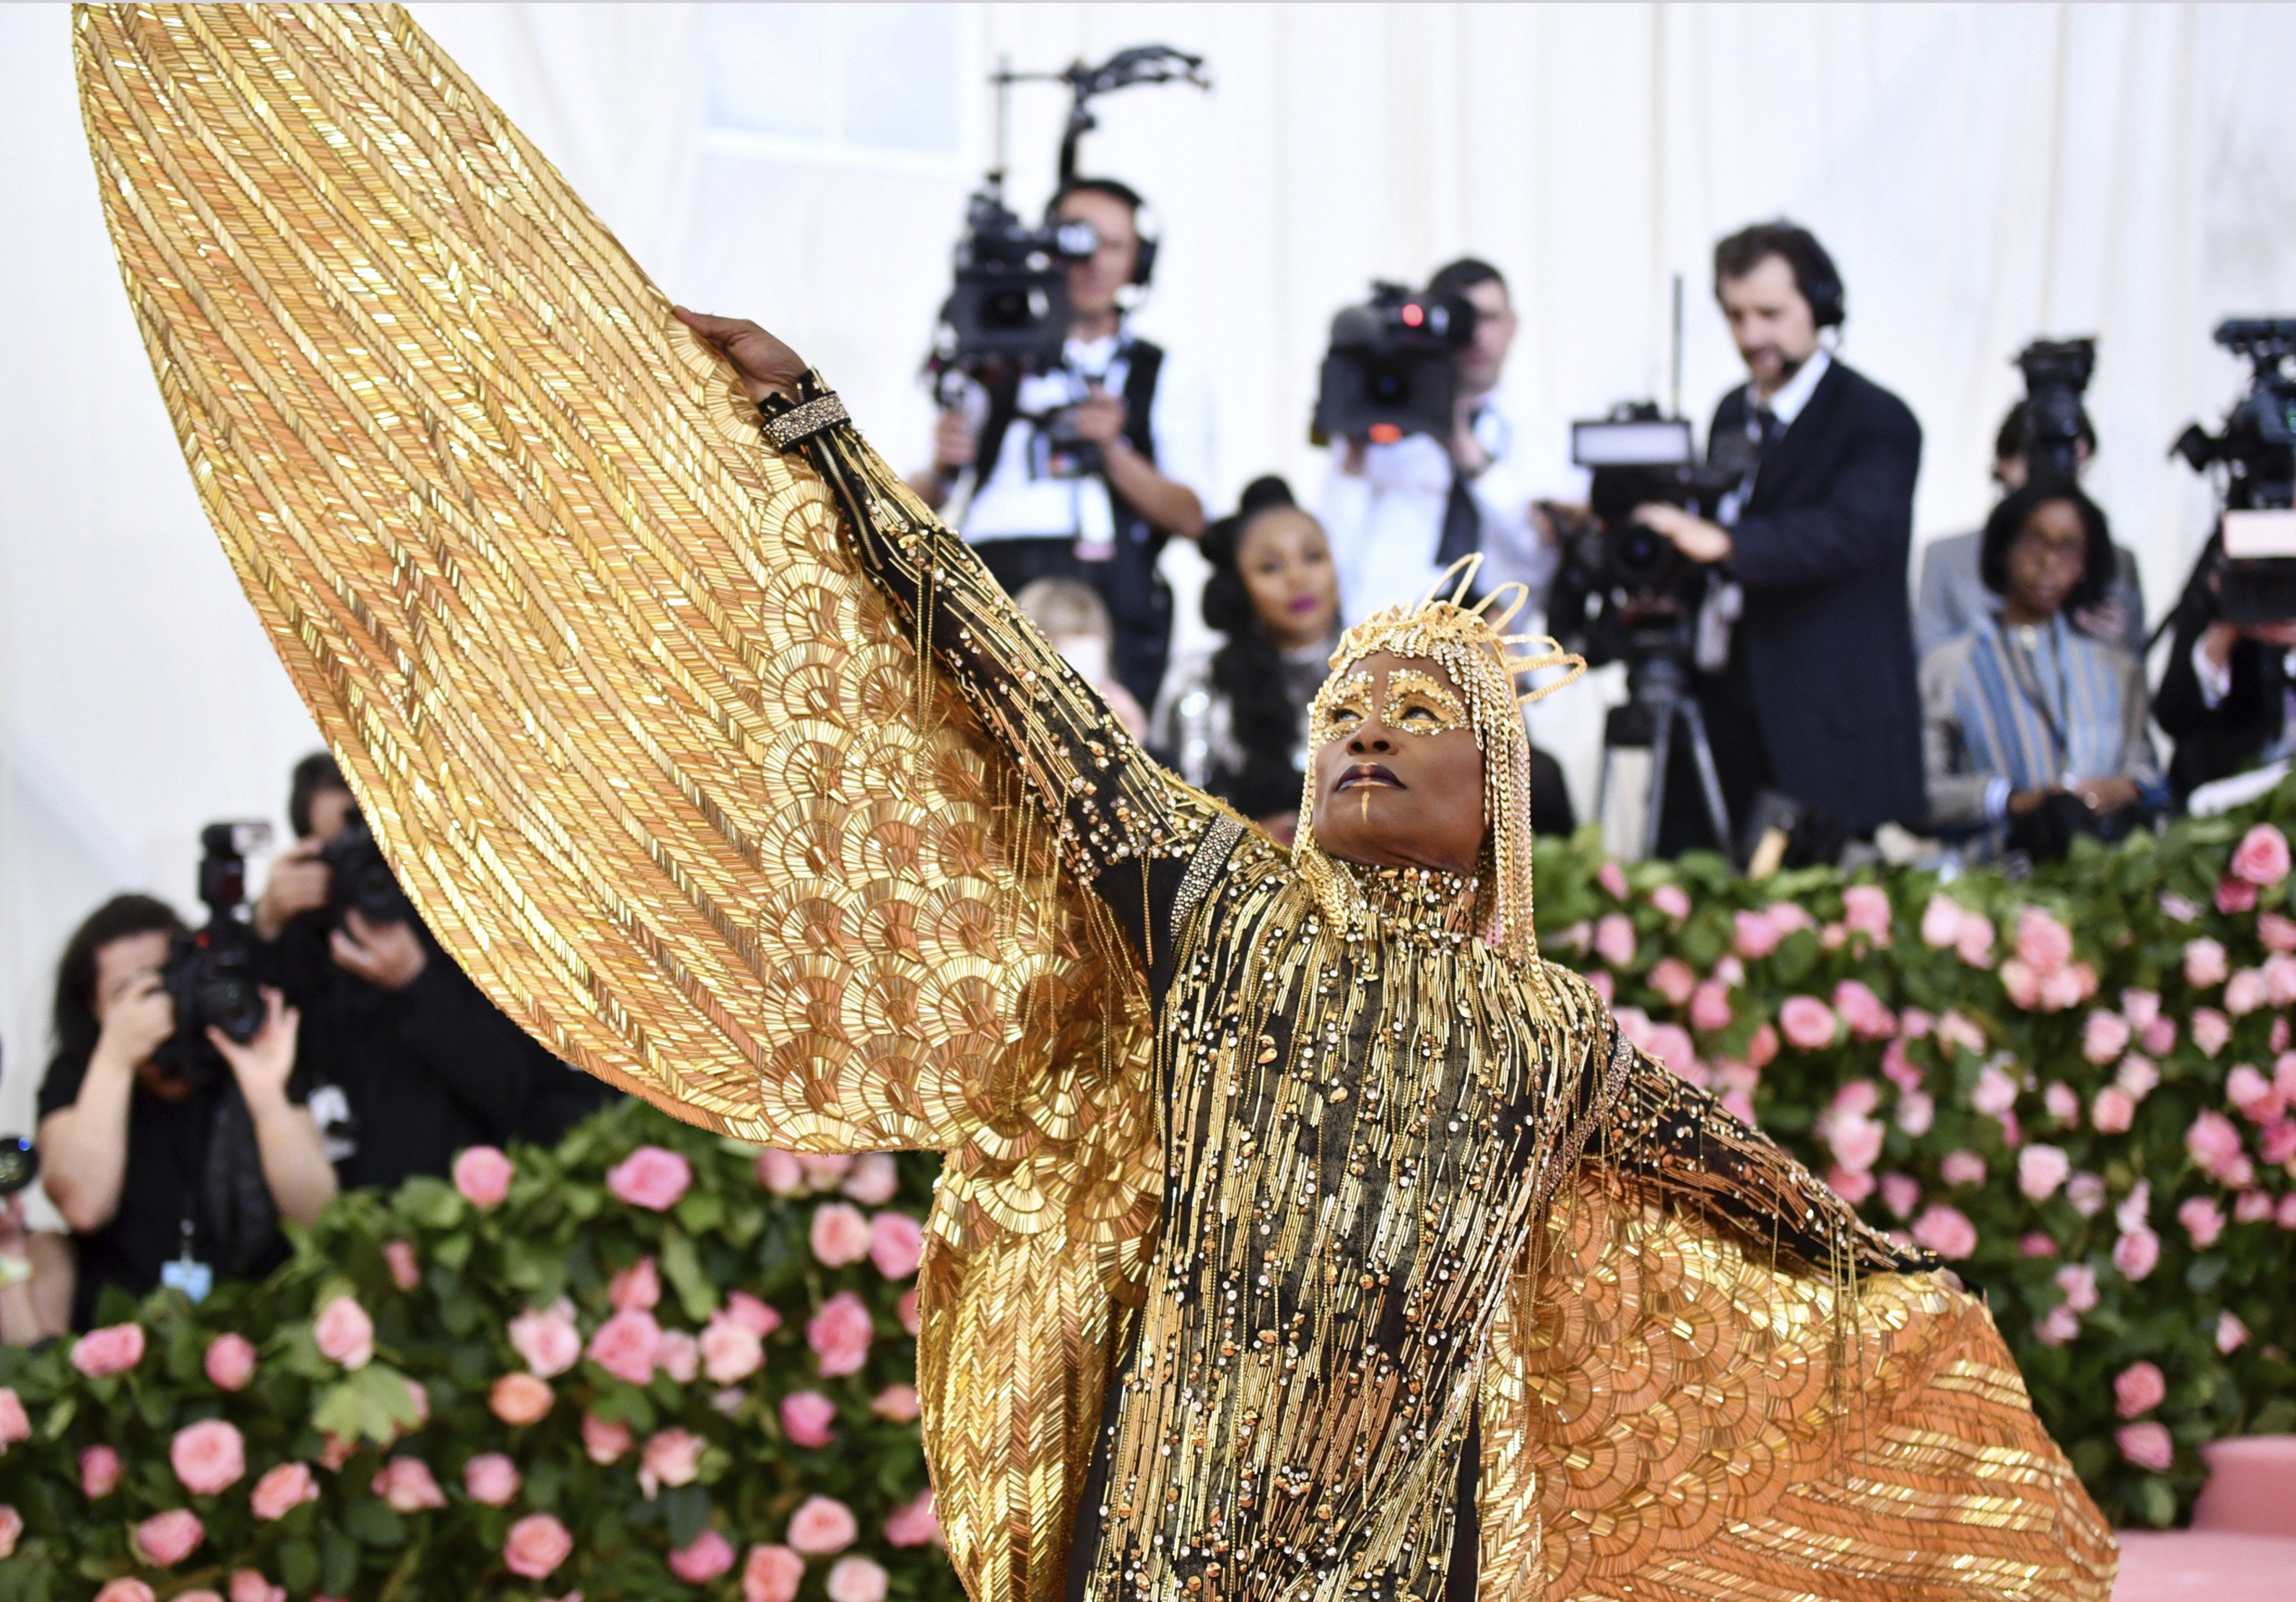 Actor Billy Porter soared above other Met Gala attendees with his elevated take on the theme, in a look from The Blonds. Photo: AP